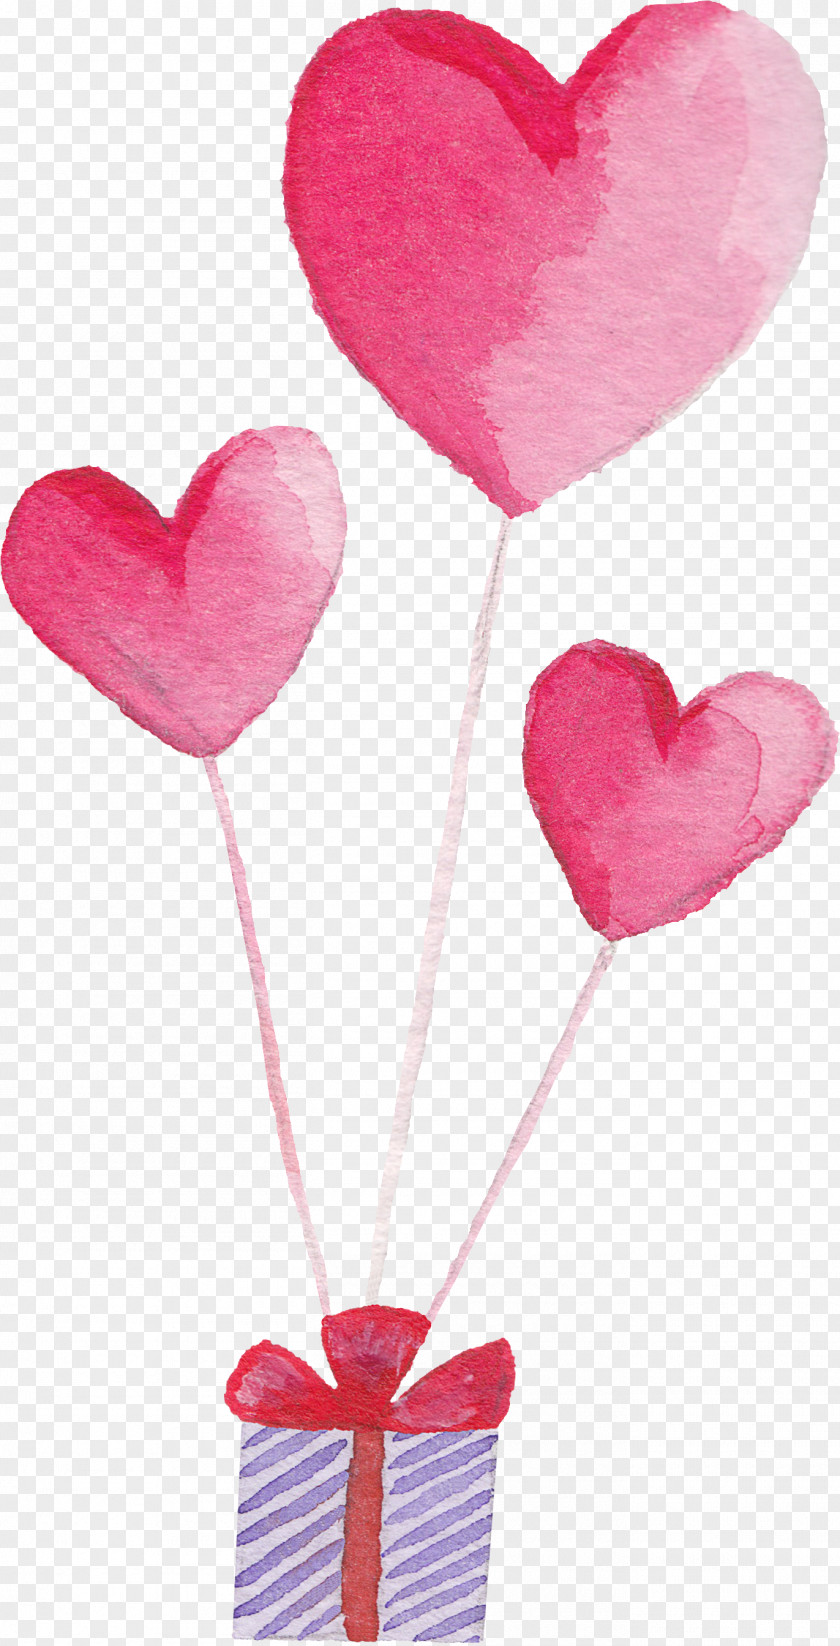 Peach Heart And Gift Box Balloon Cartoon Watercolor Painting Pink PNG